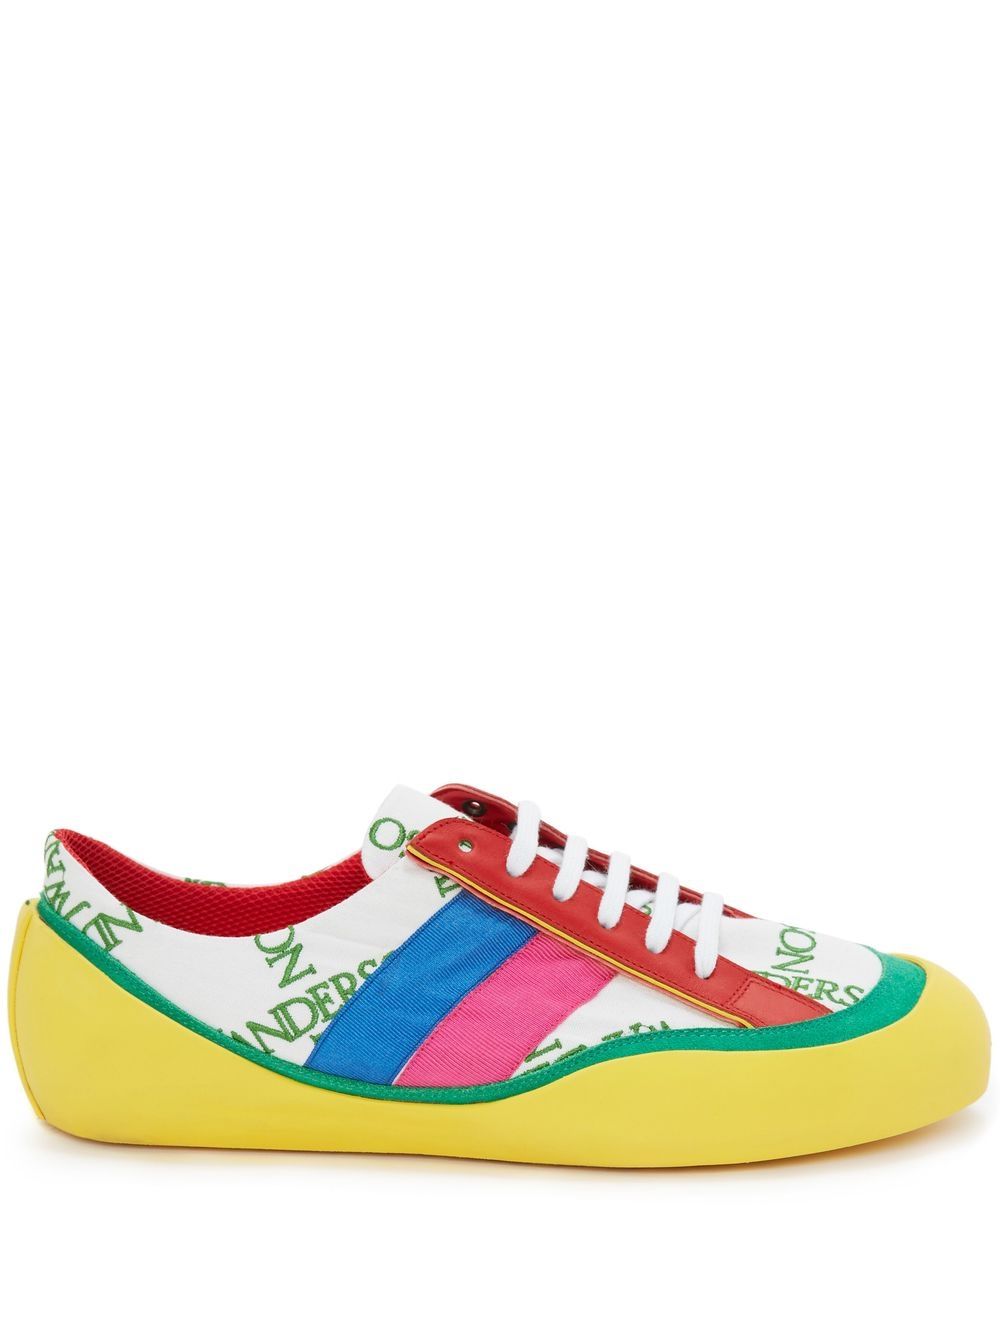 Image 1 of JW Anderson Bubble low top sneakers